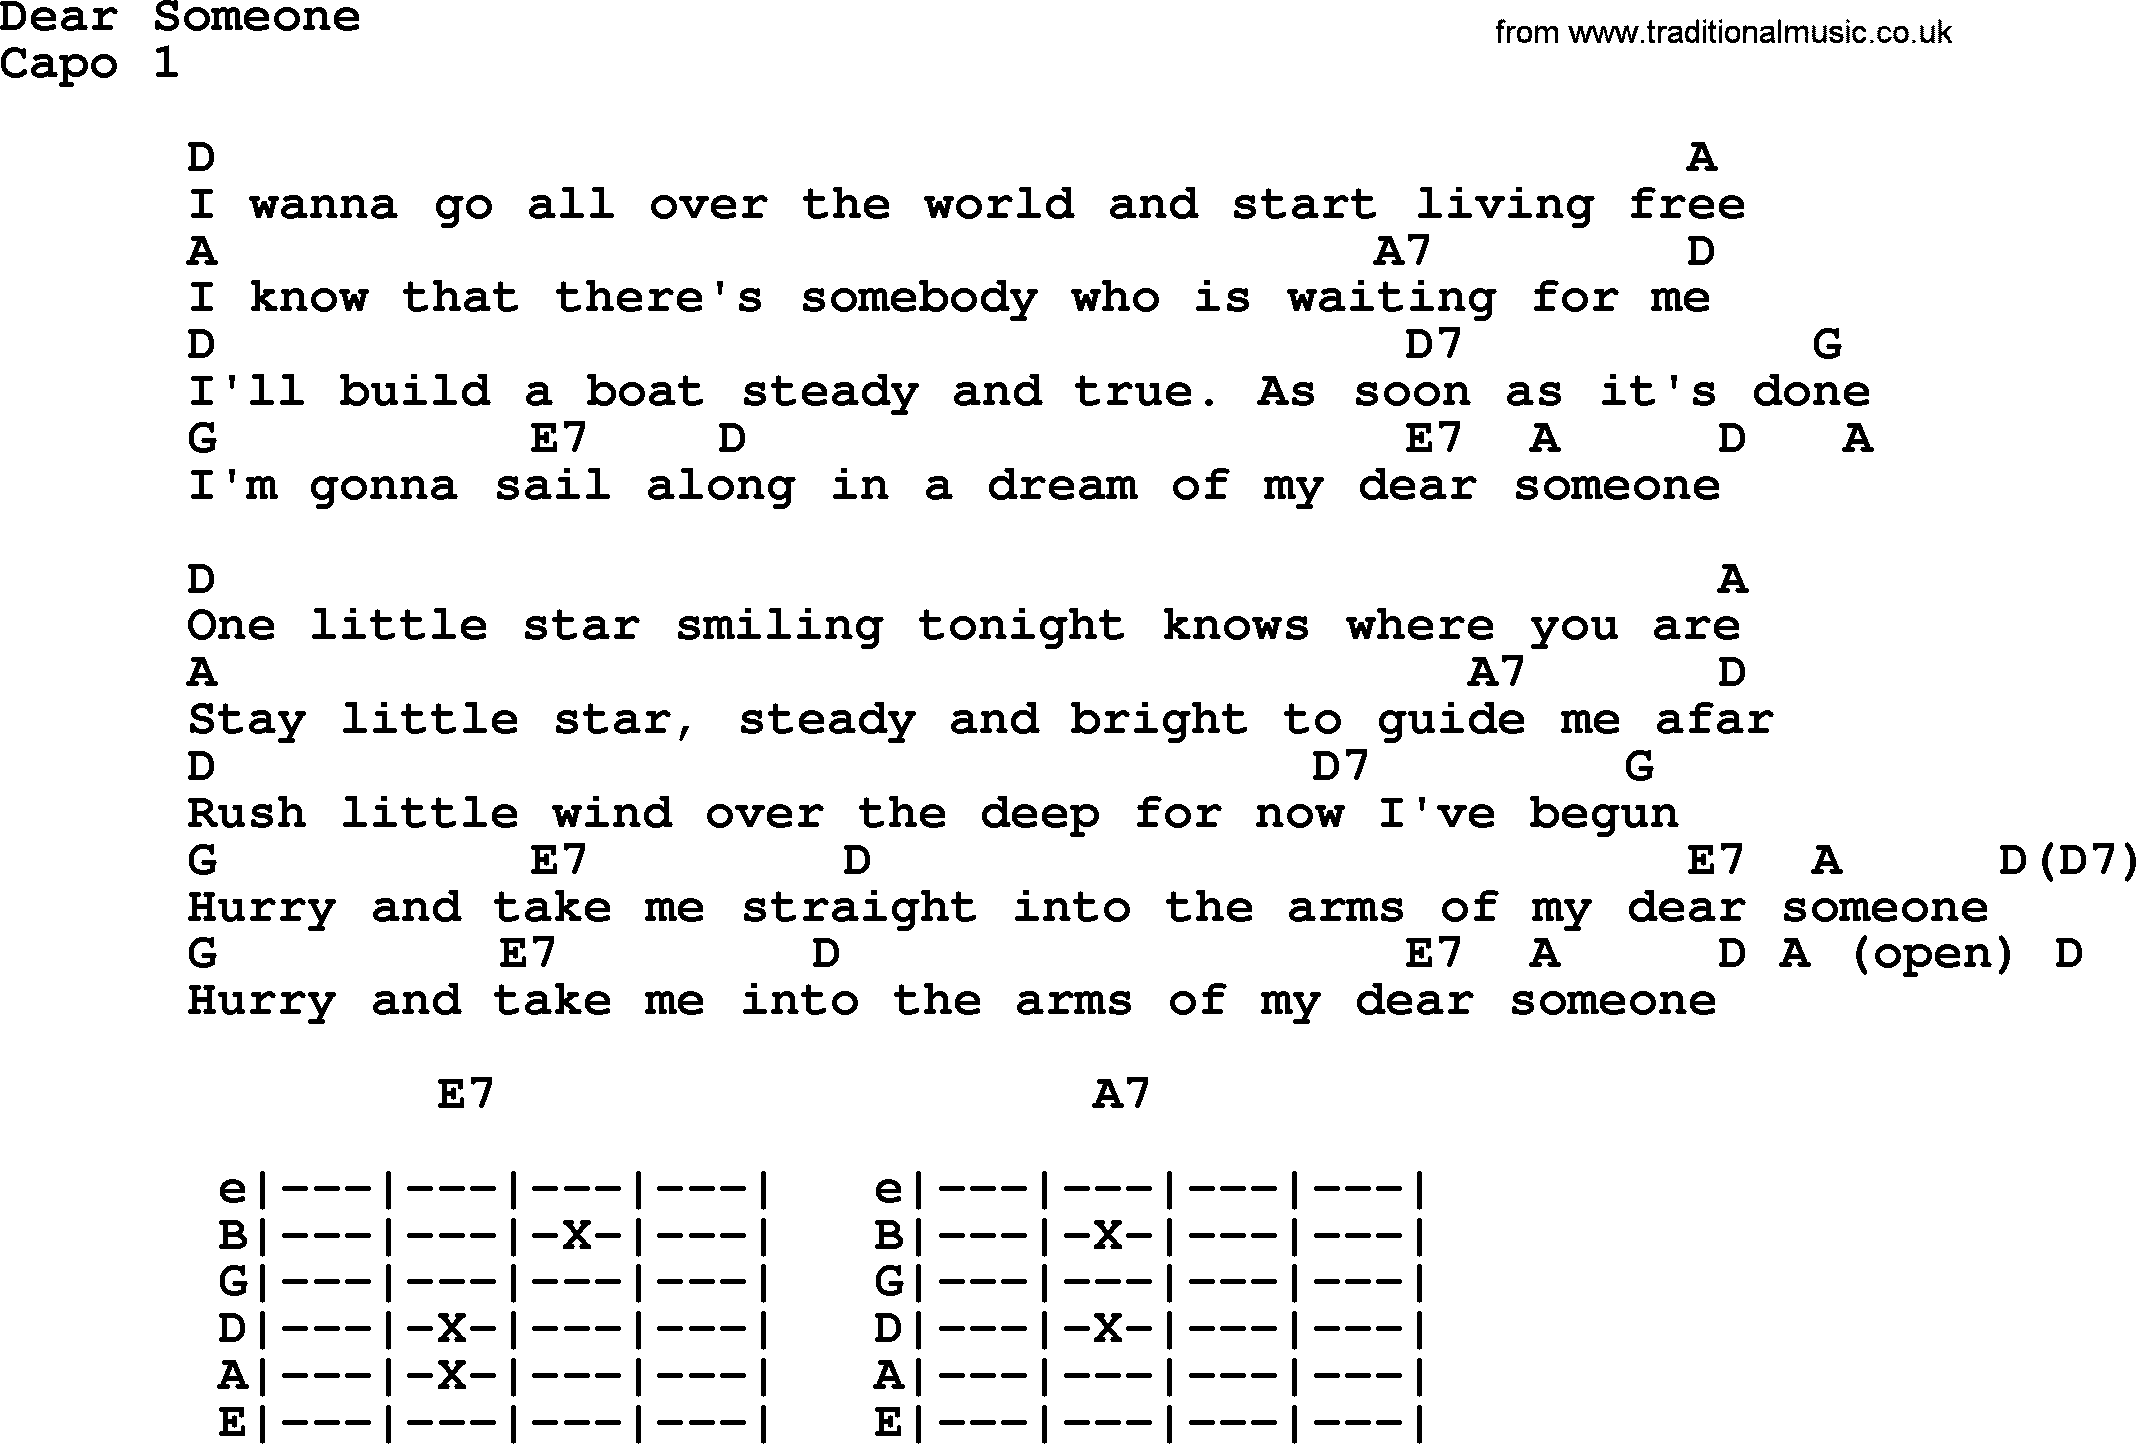 Bluegrass song: Dear Someone, lyrics and chords